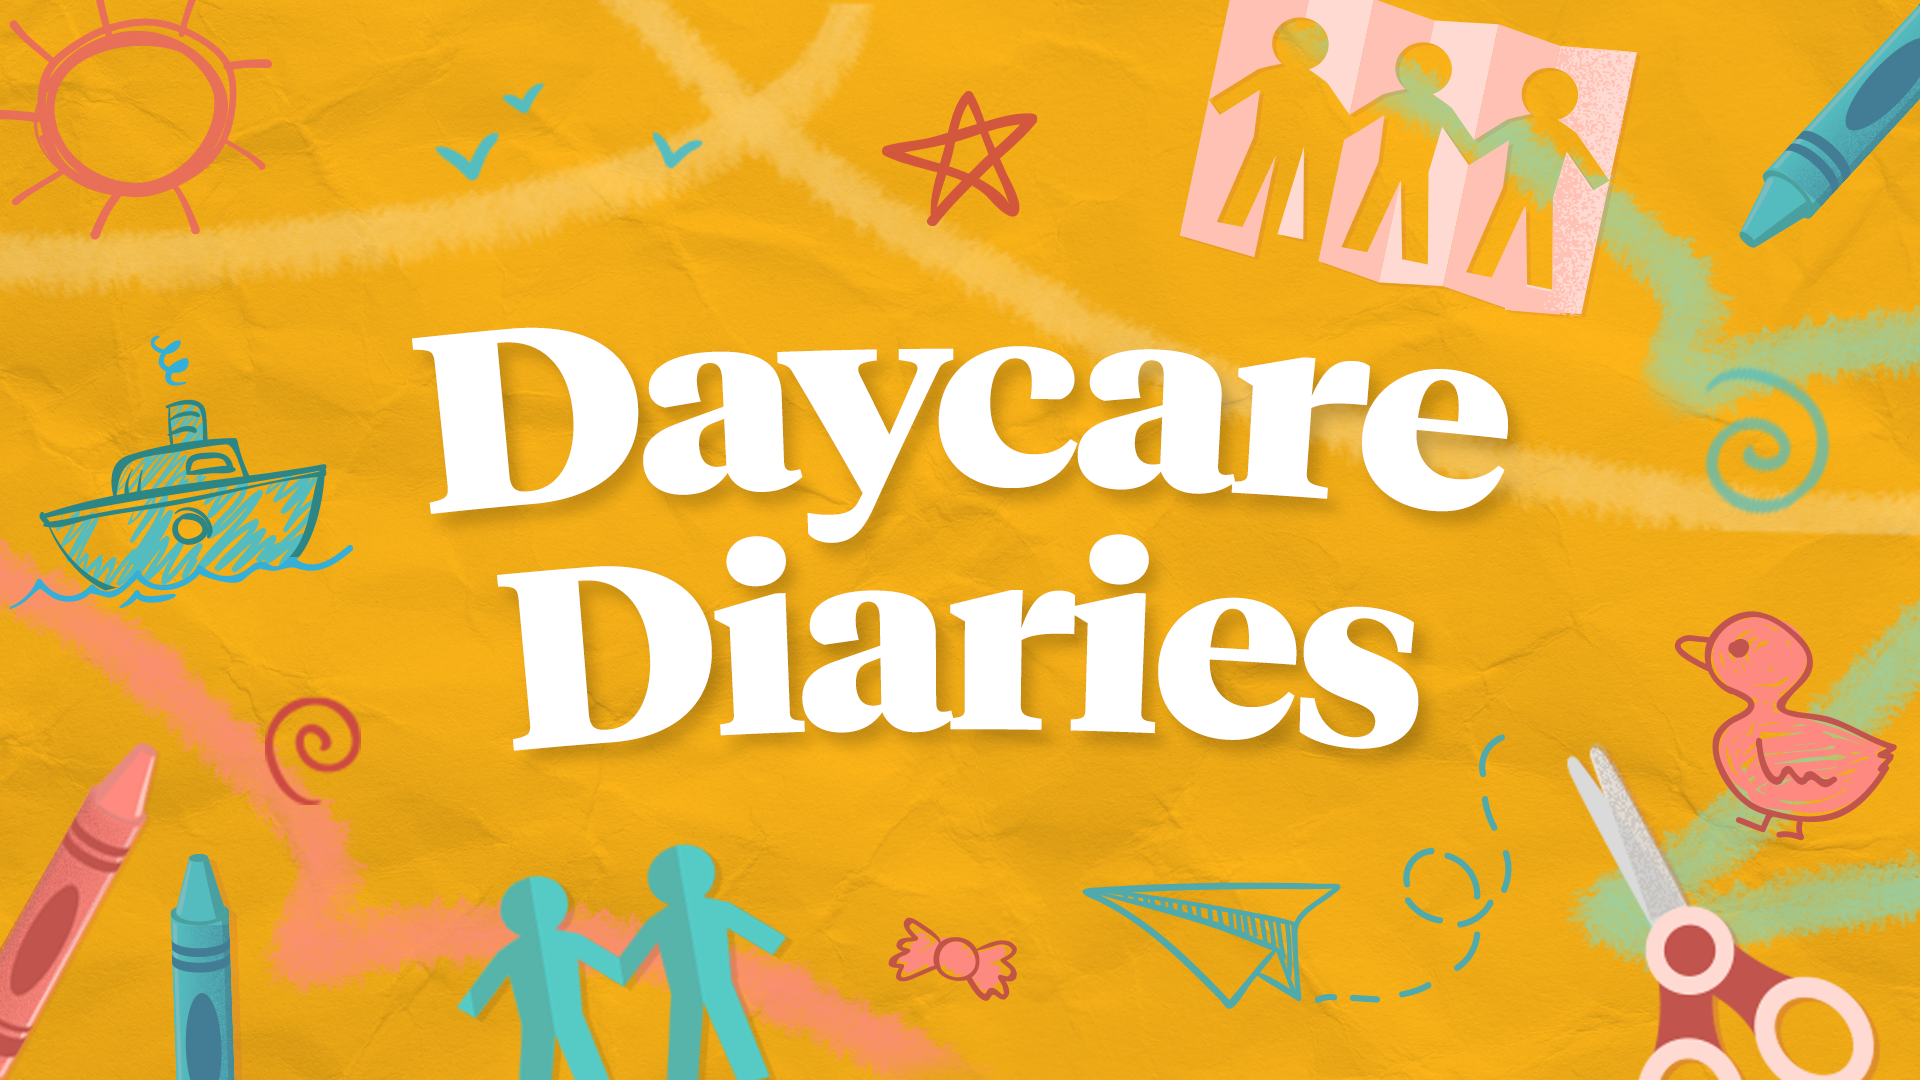 Daycare Diaries: 'I can't stand it when parents lie about their sick kid'